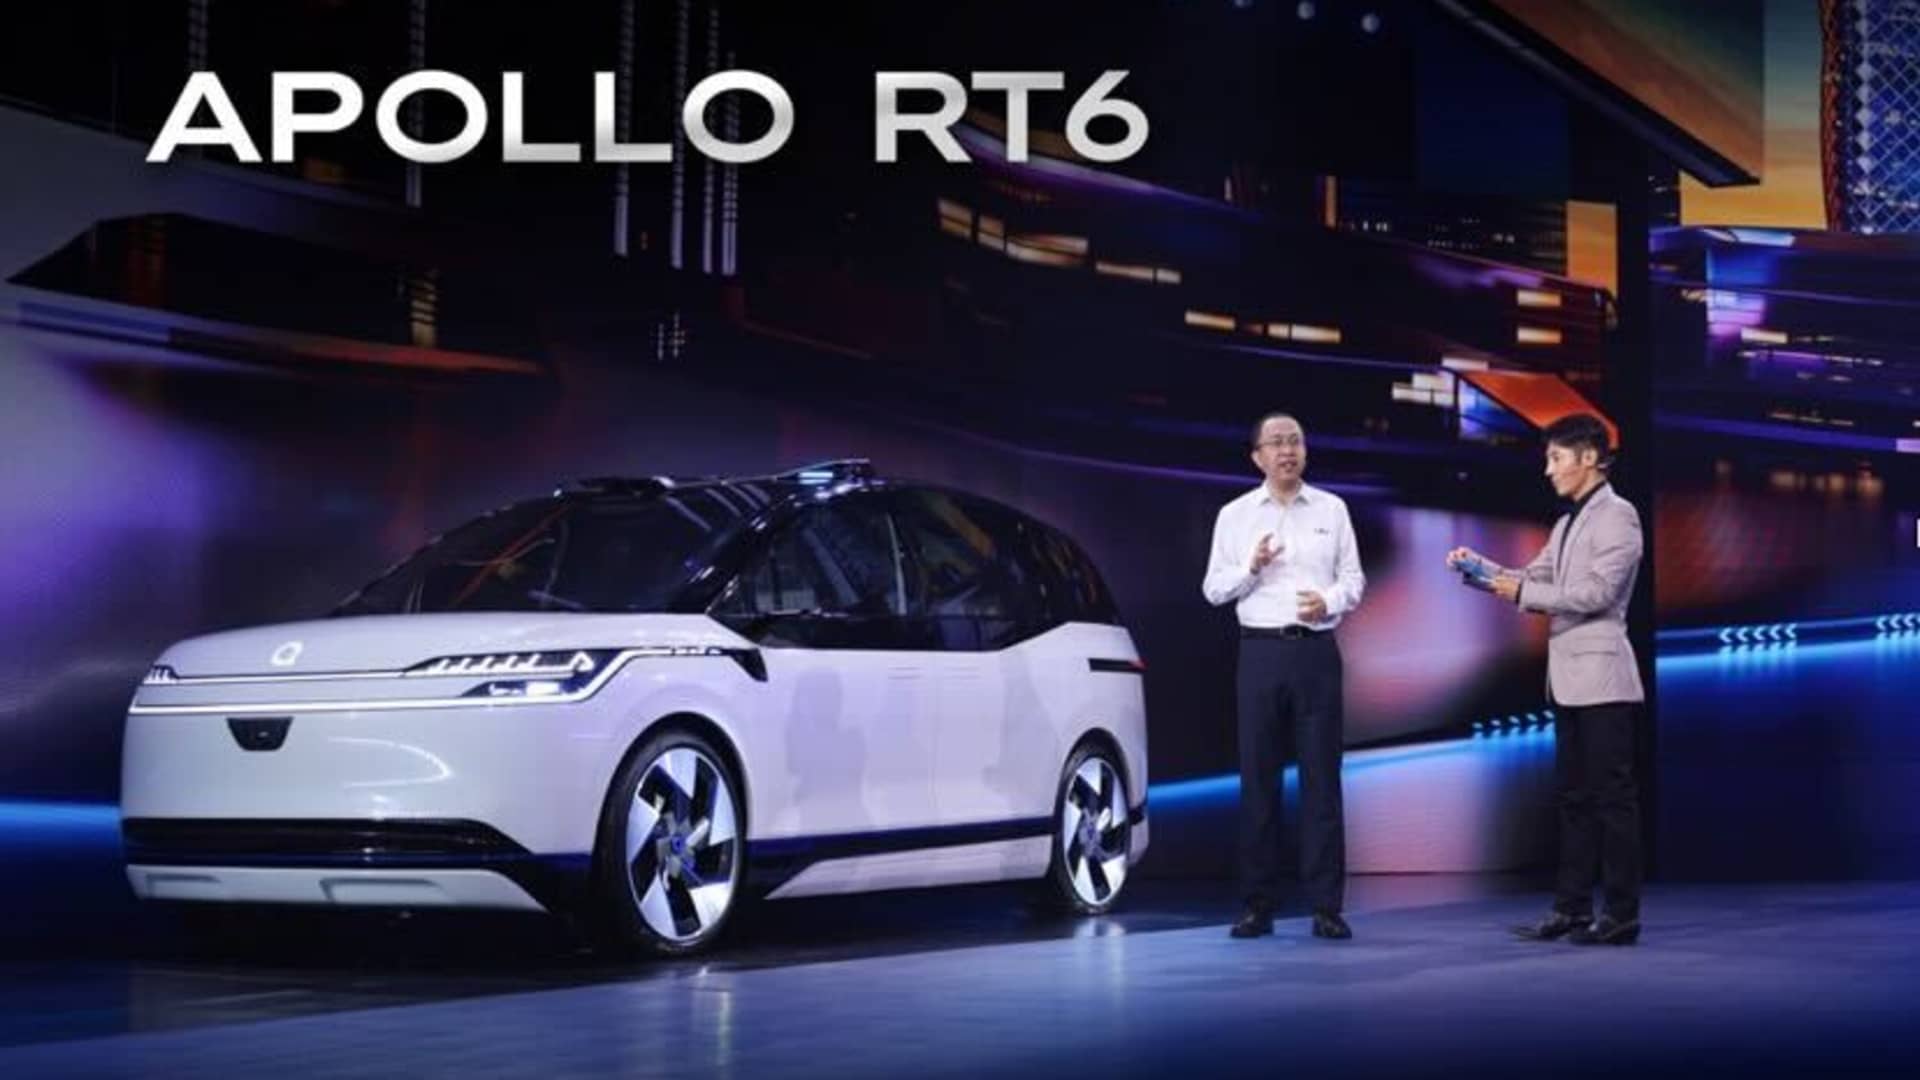 Baidu's new robotaxi can drive without a steering wheel and is 50% cheaper